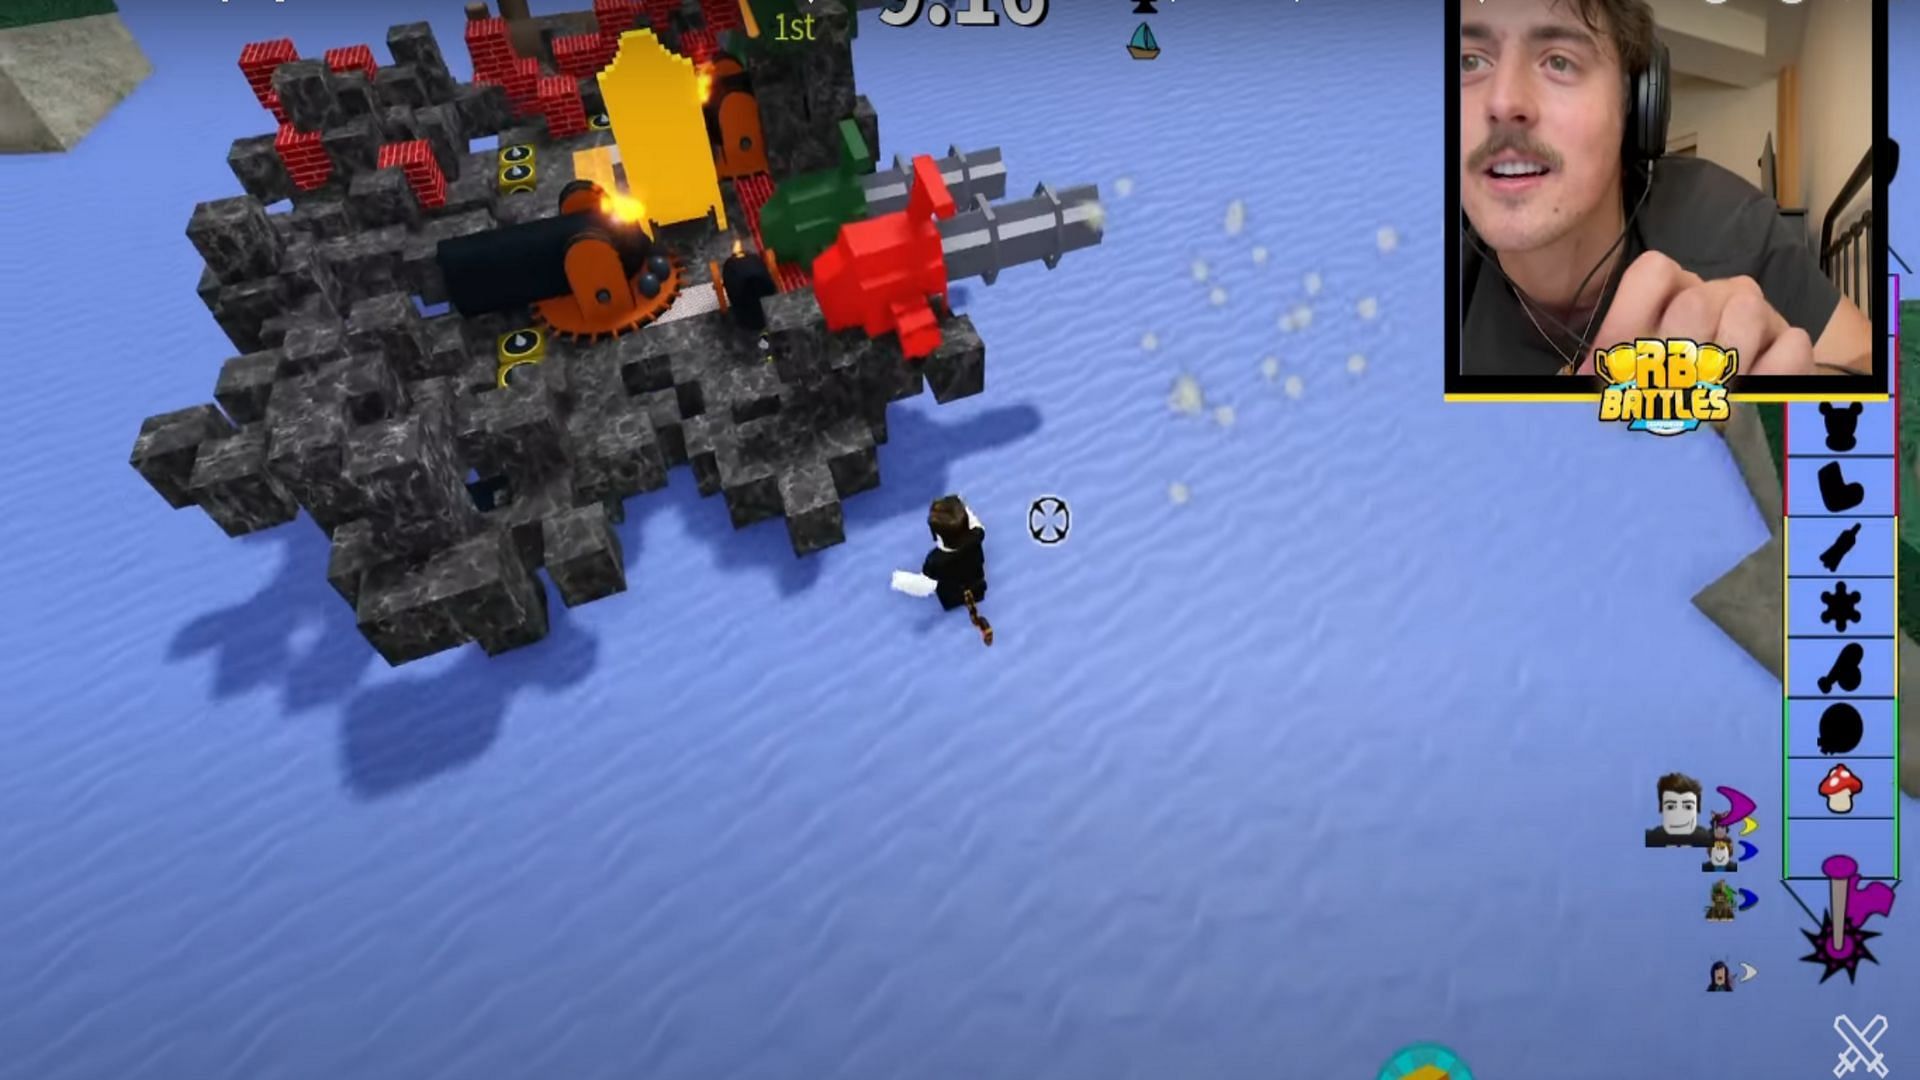 Dennis slipped and lost the round (Image via Roblox Battles/YouTube)